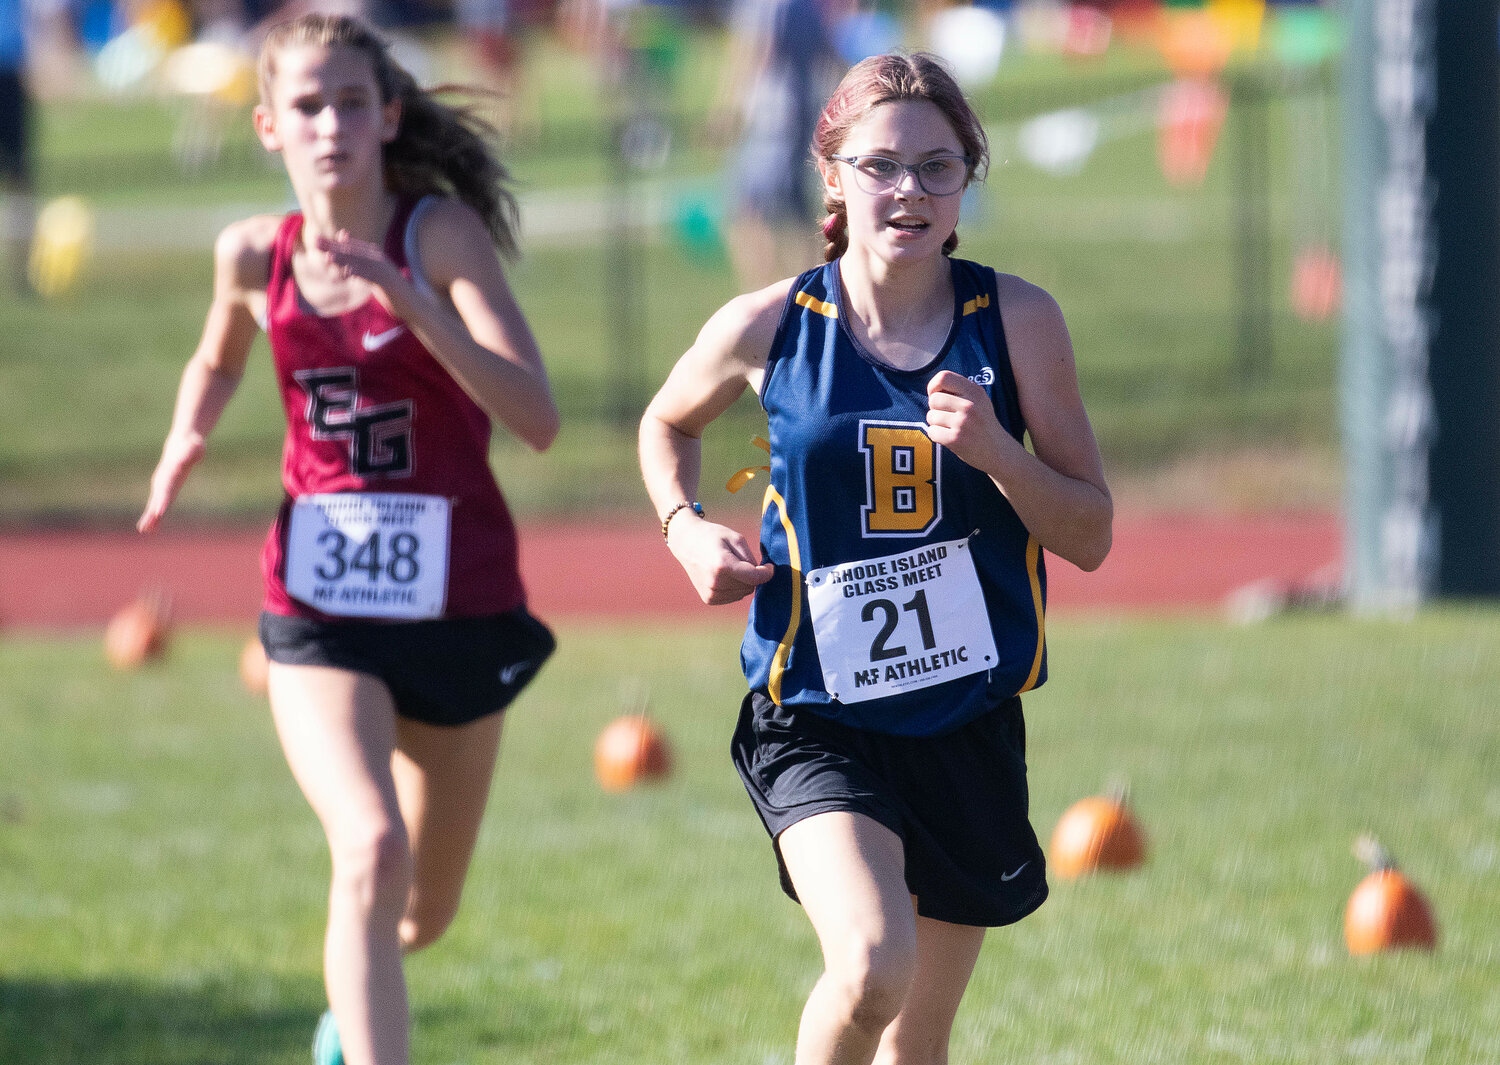 Evelyn Lefort was Barrington’s top finisher in the Class B Championship on Saturday at Ponaganset High School.